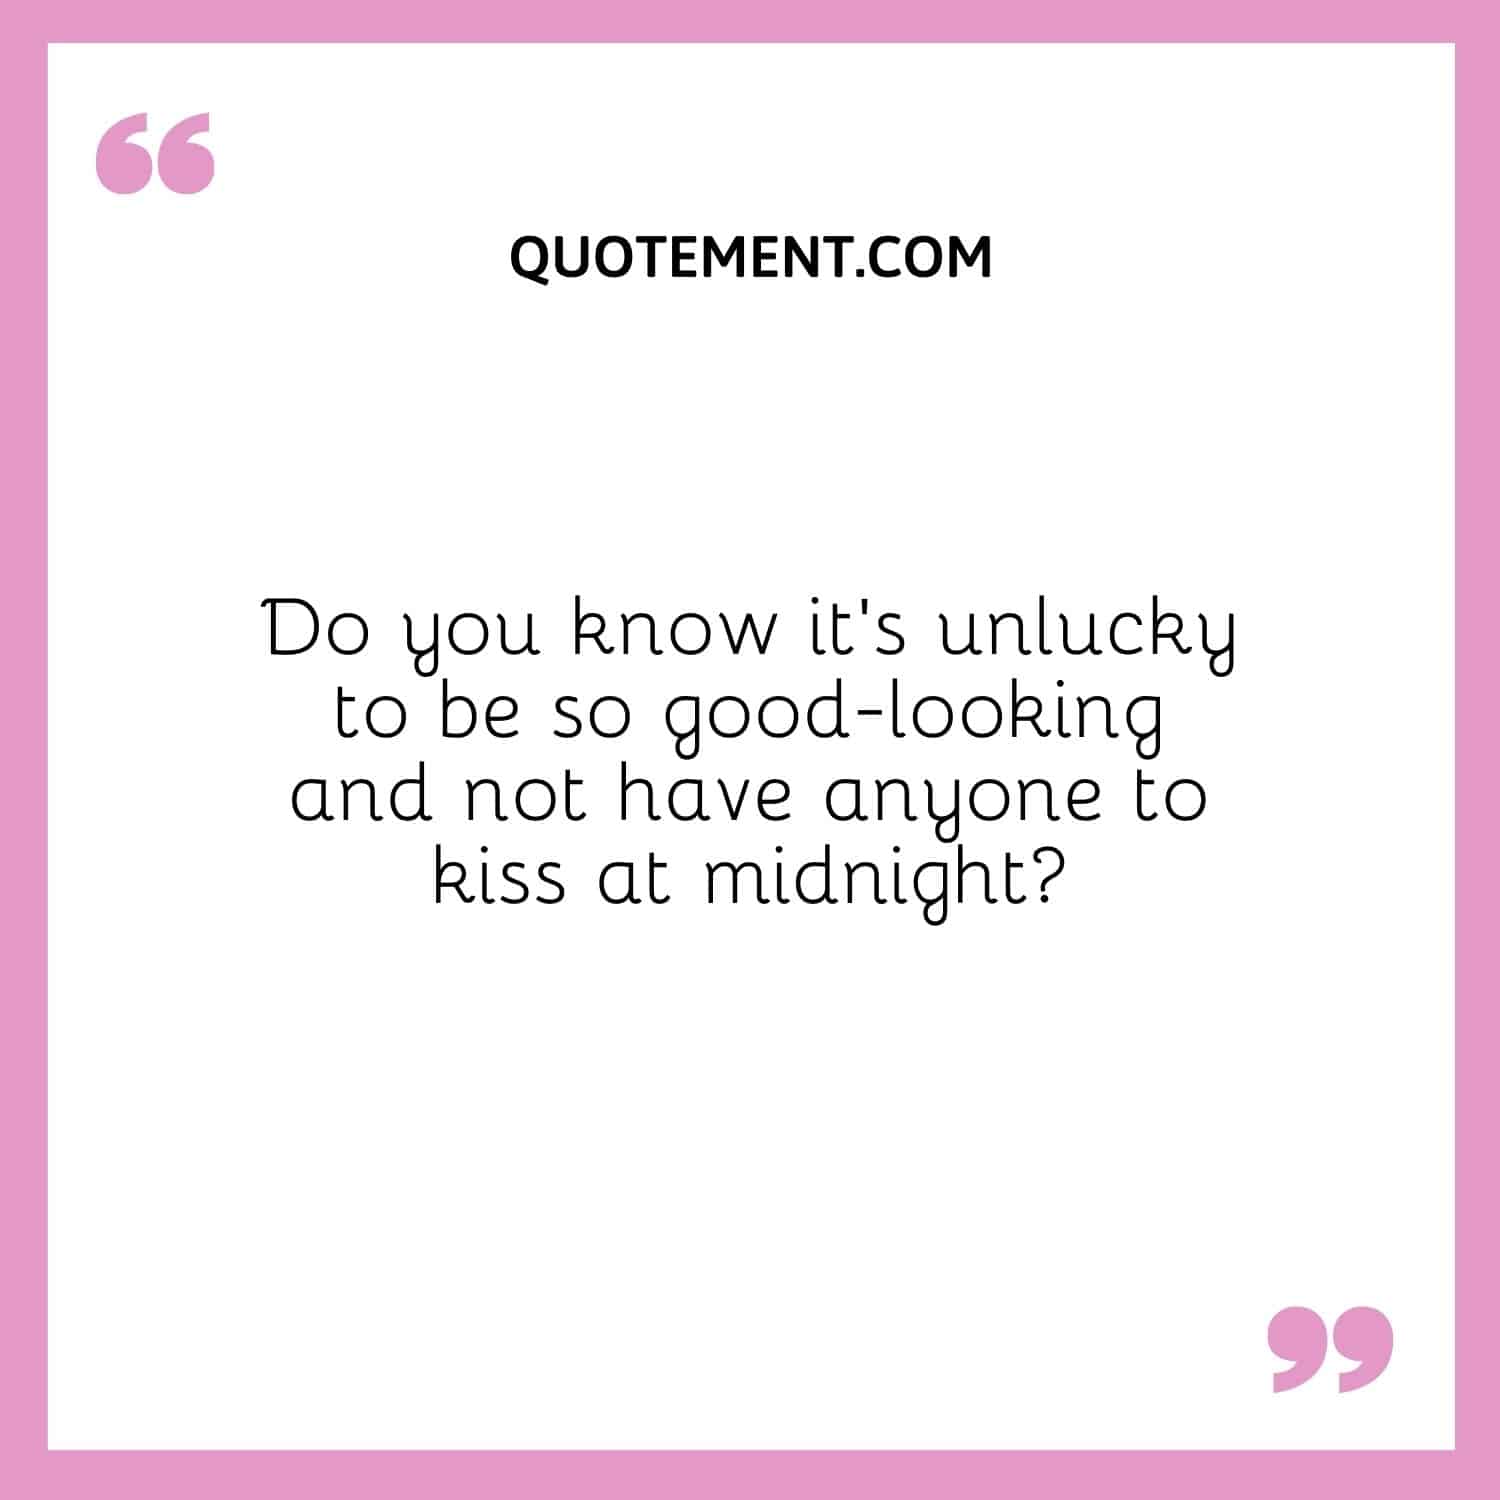 Do you know it’s unlucky to be so good-looking and not have anyone to kiss at midnight